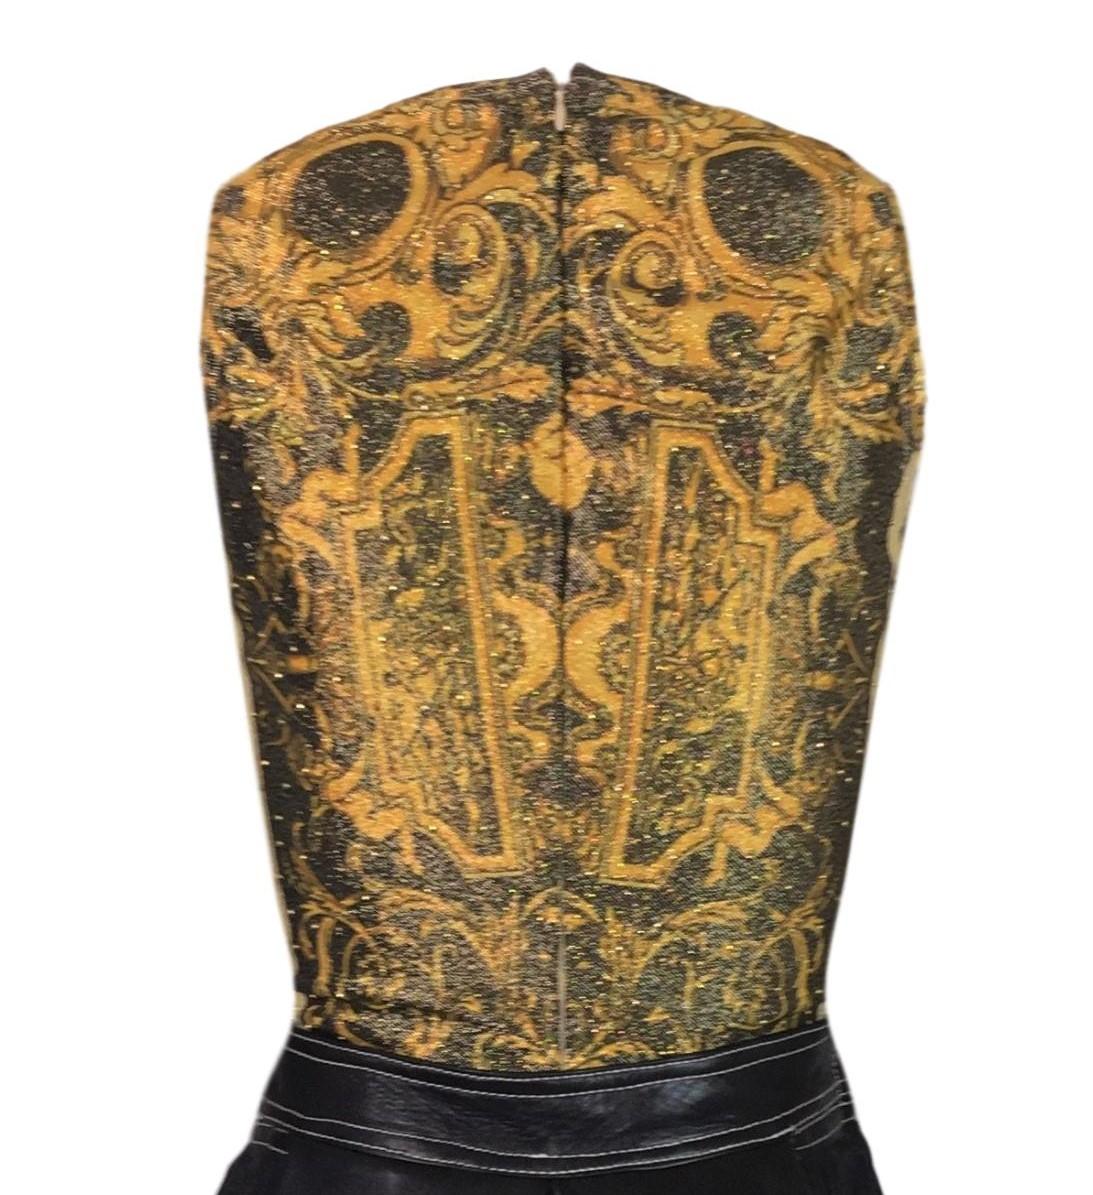 DESIGNER: S/S 1992 Gianni Versace

CONDITION: Good- flawless!

FABRIC: Nylon blend

SIZE: 42- runs small with stretch

MEASUREMENTS; provided as a courtesy only- not a guarantee of fit: 

Chest: 30-38